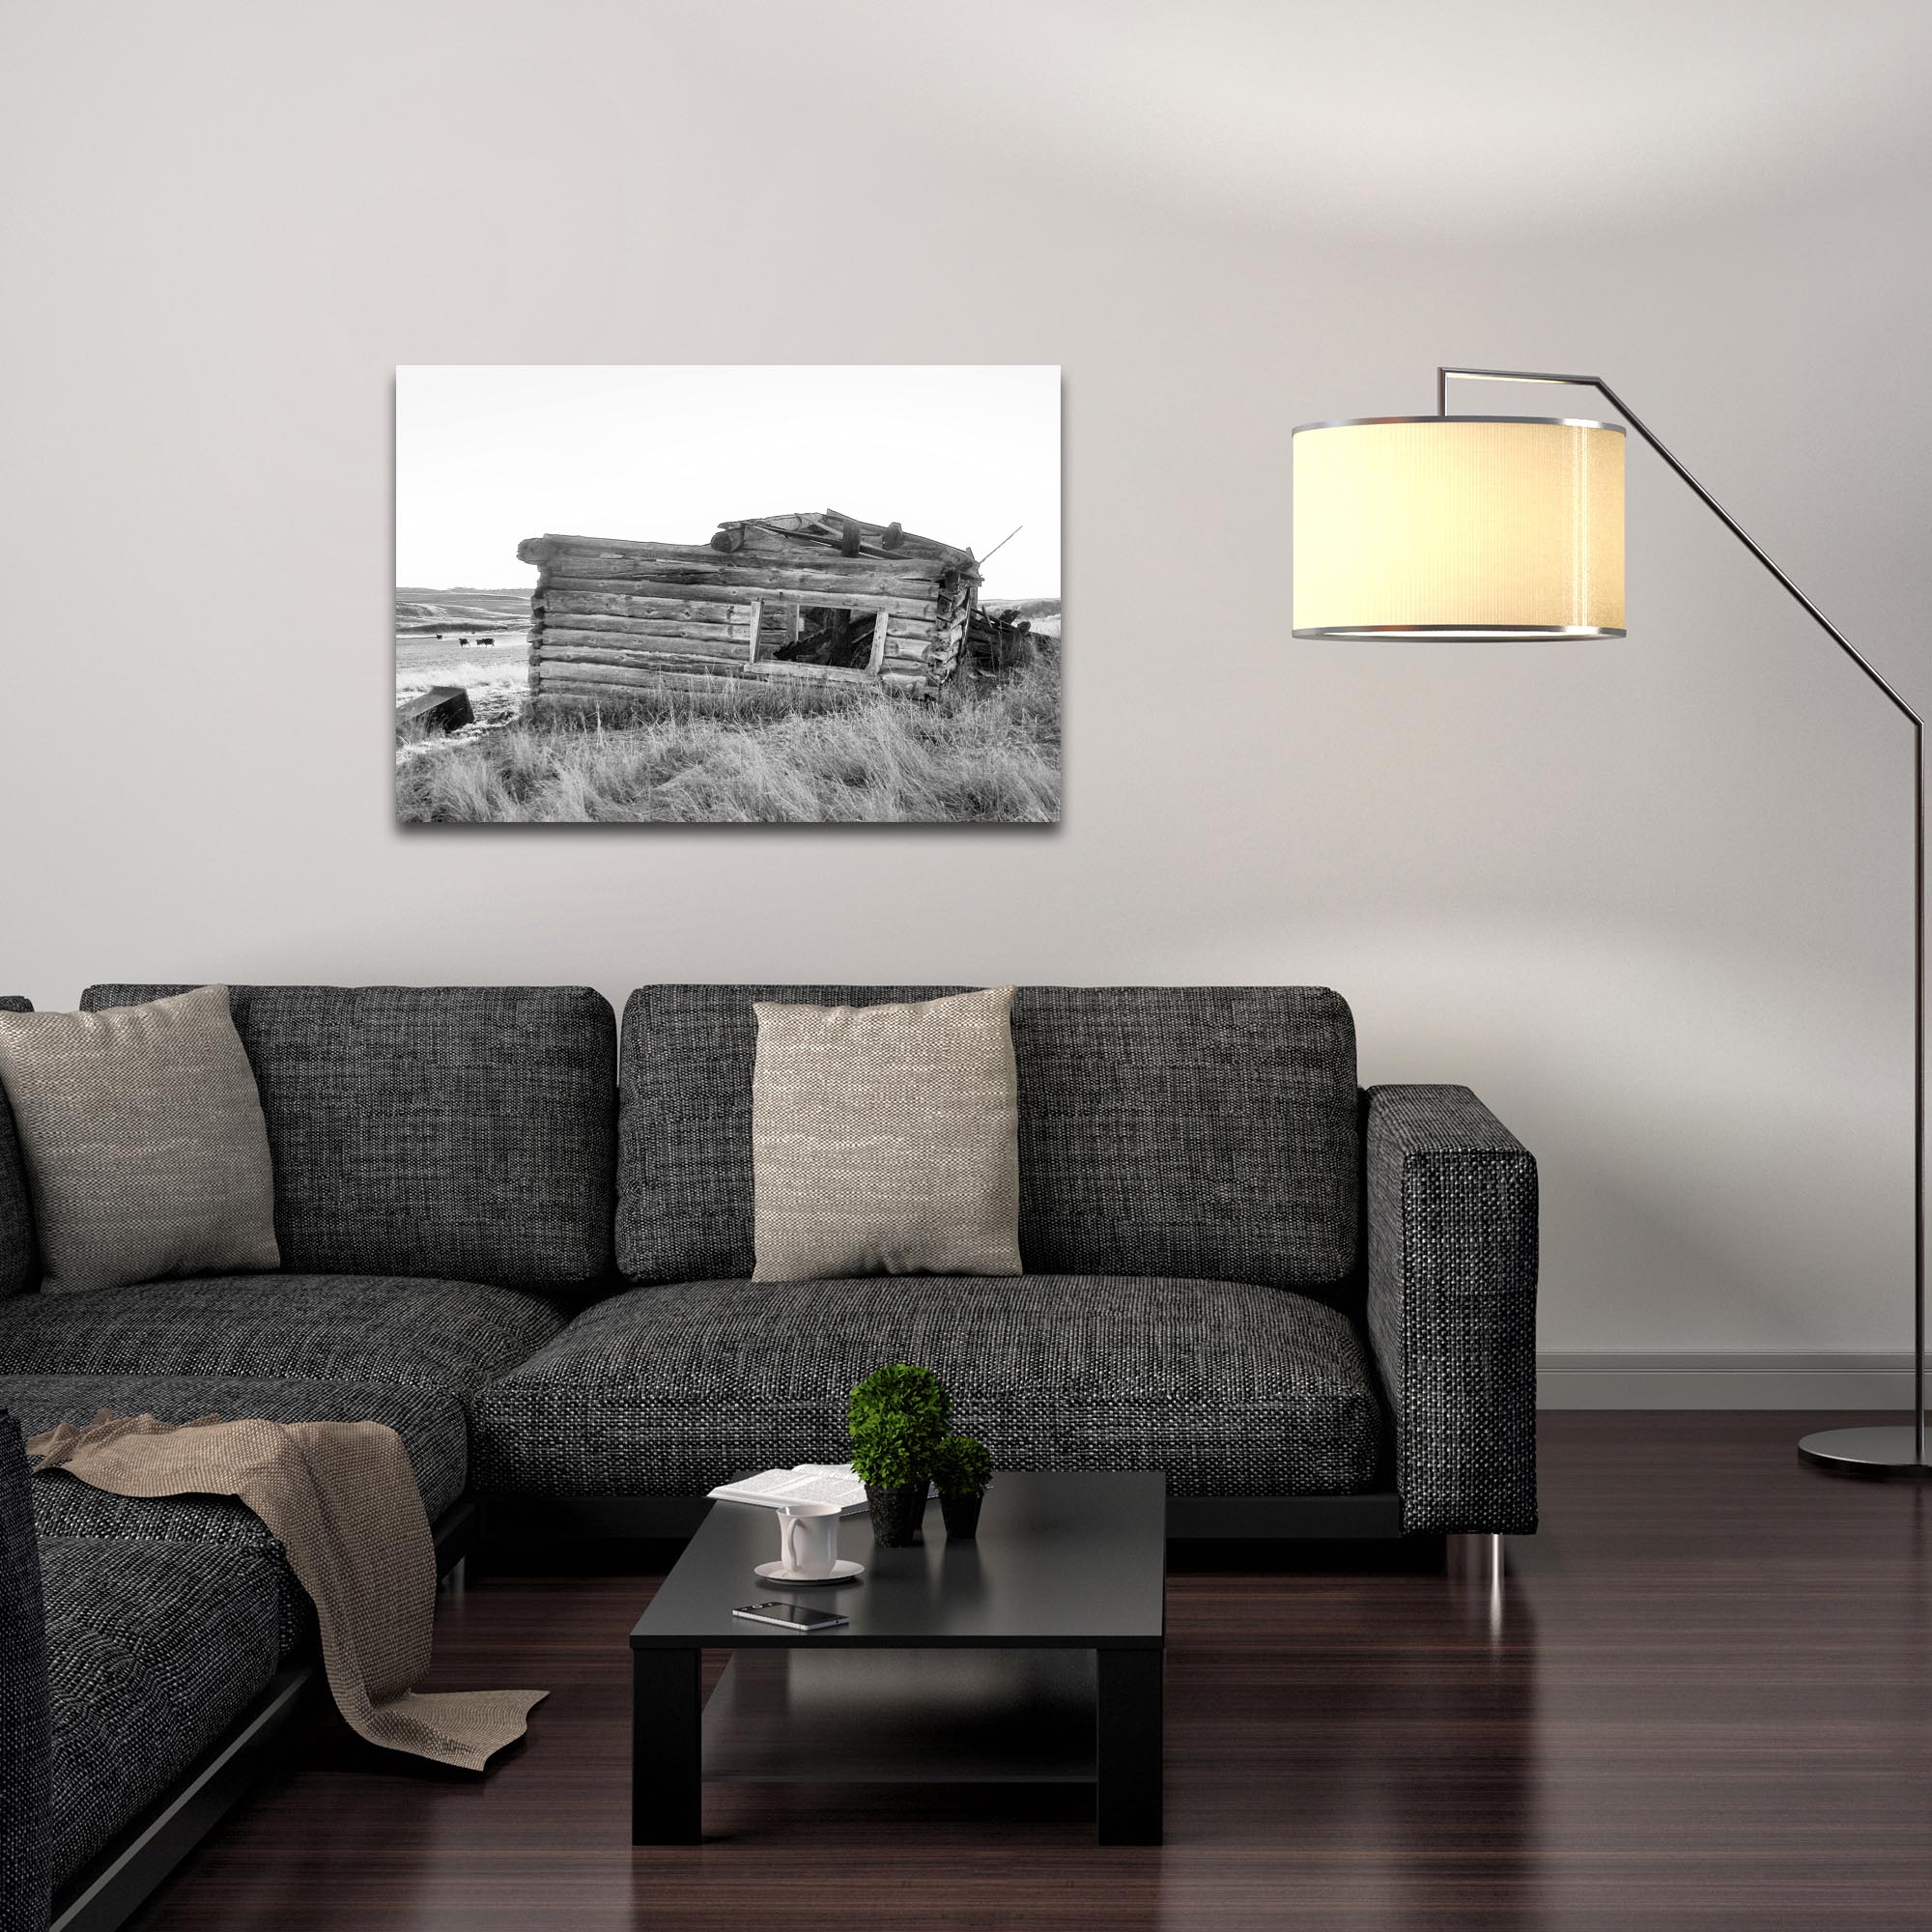 Western Wall Art 'The Perch' - American West Decor on Metal or Plexiglass - Lifestyle View